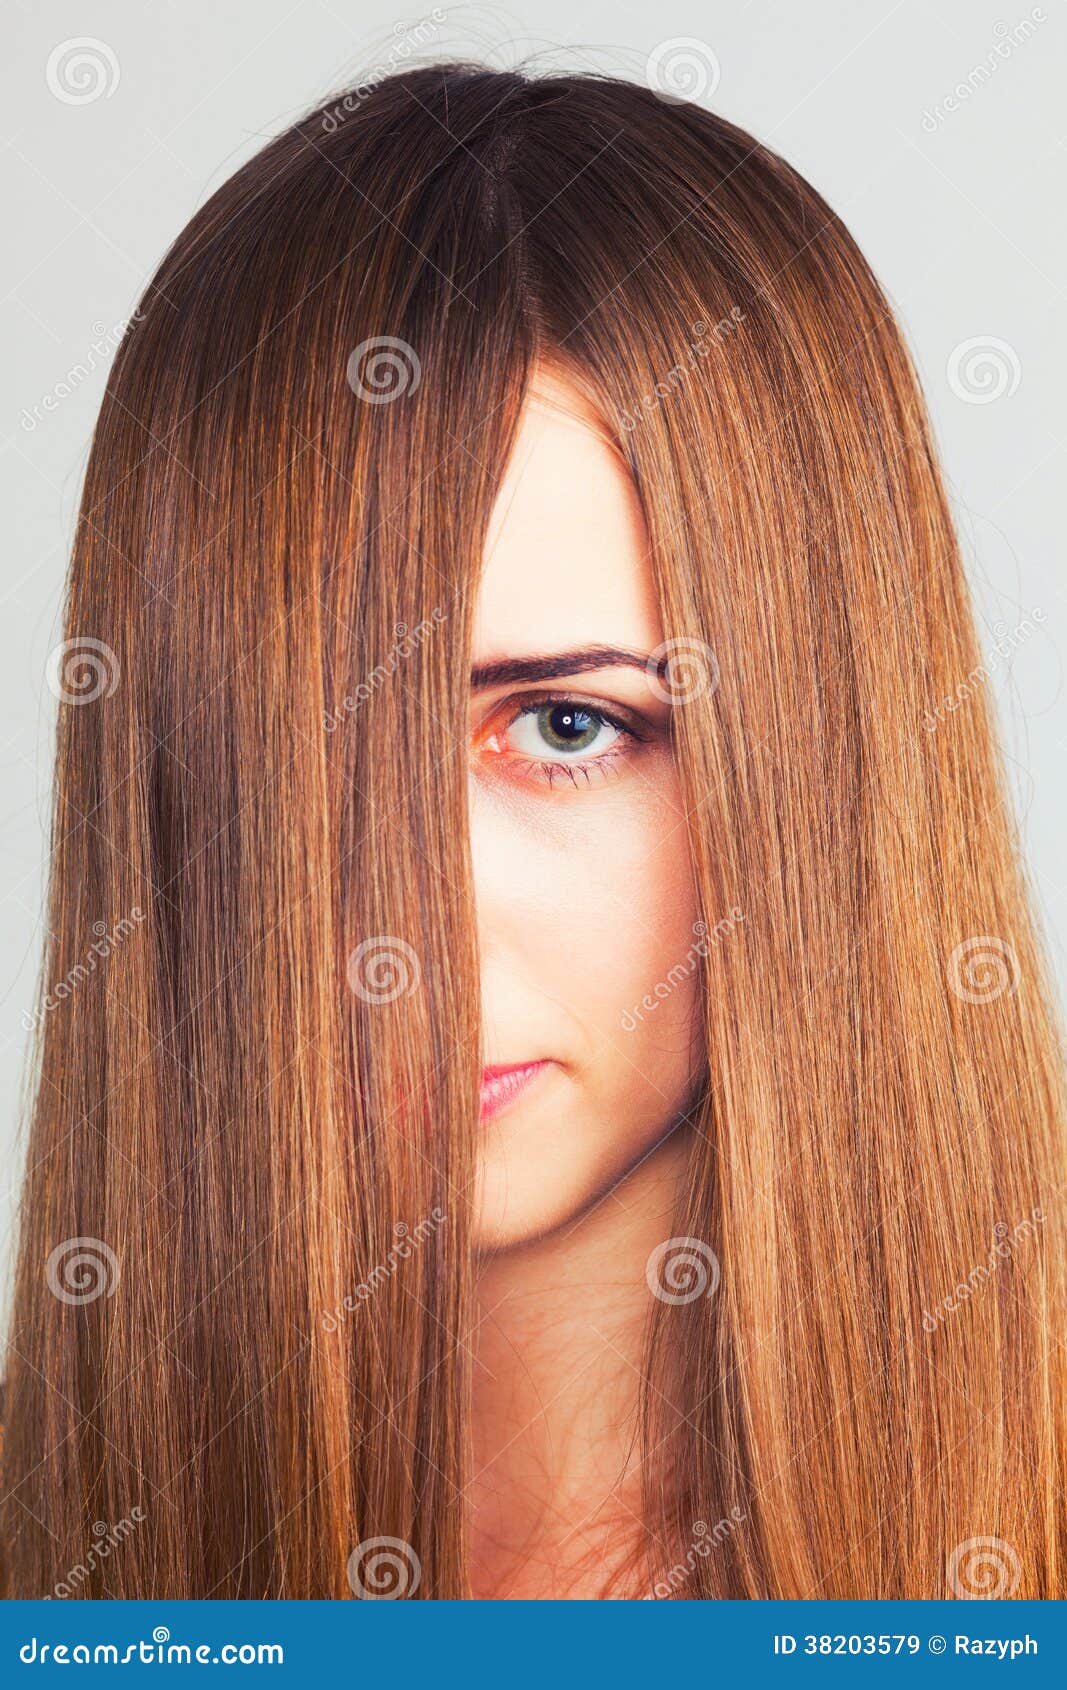 Girl with Face Covered by Long Blonde Hair Stock Image - Image of  beautiful, blonde: 38203579